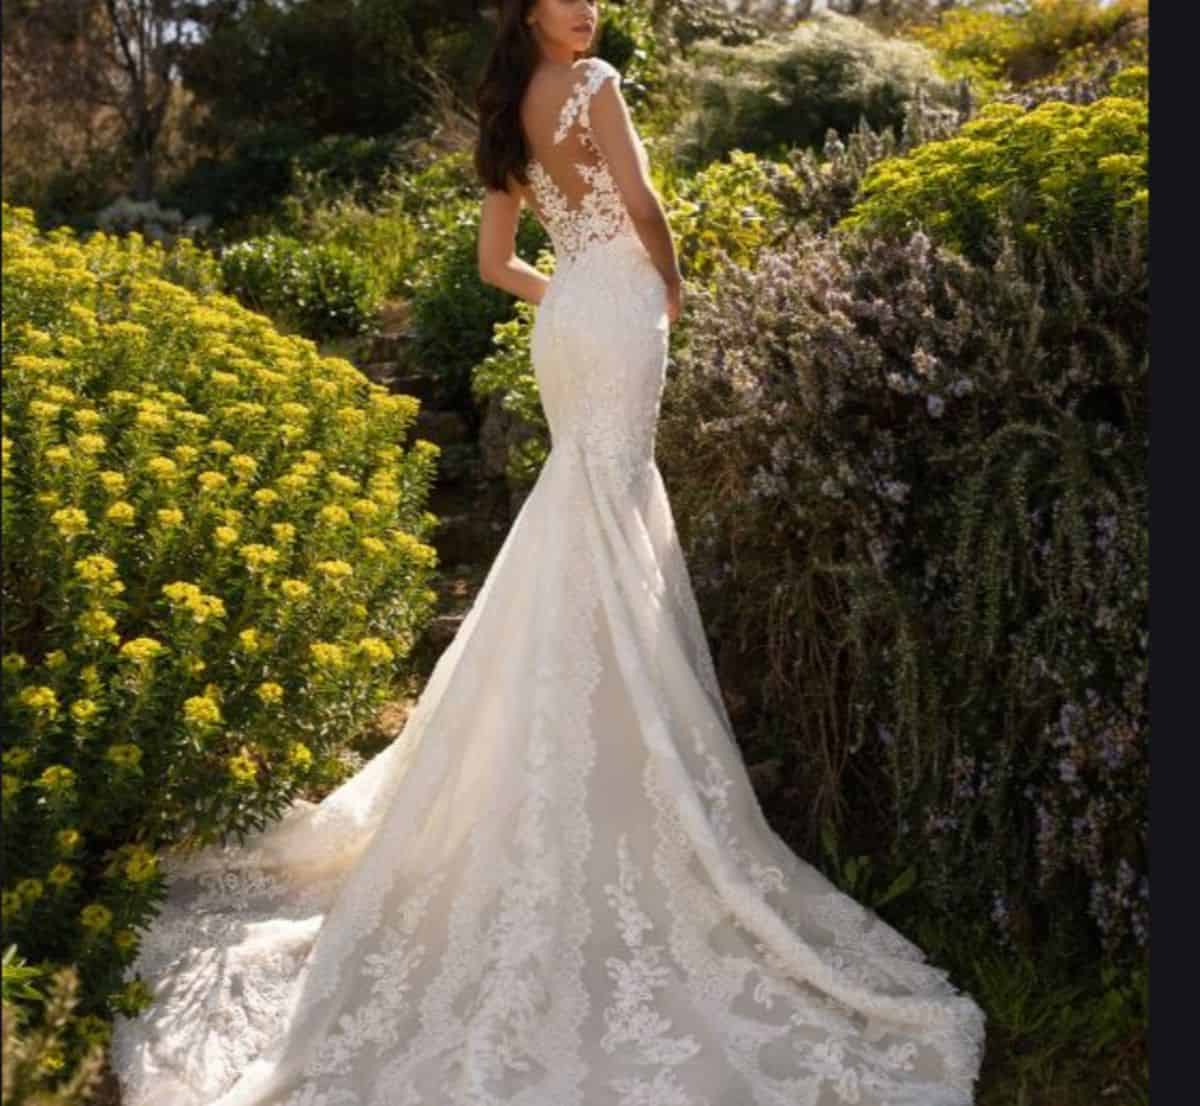 Mermaid Style Wedding Dresses For Bride With Pleat Cap Sleeve Illusion Back Gown 